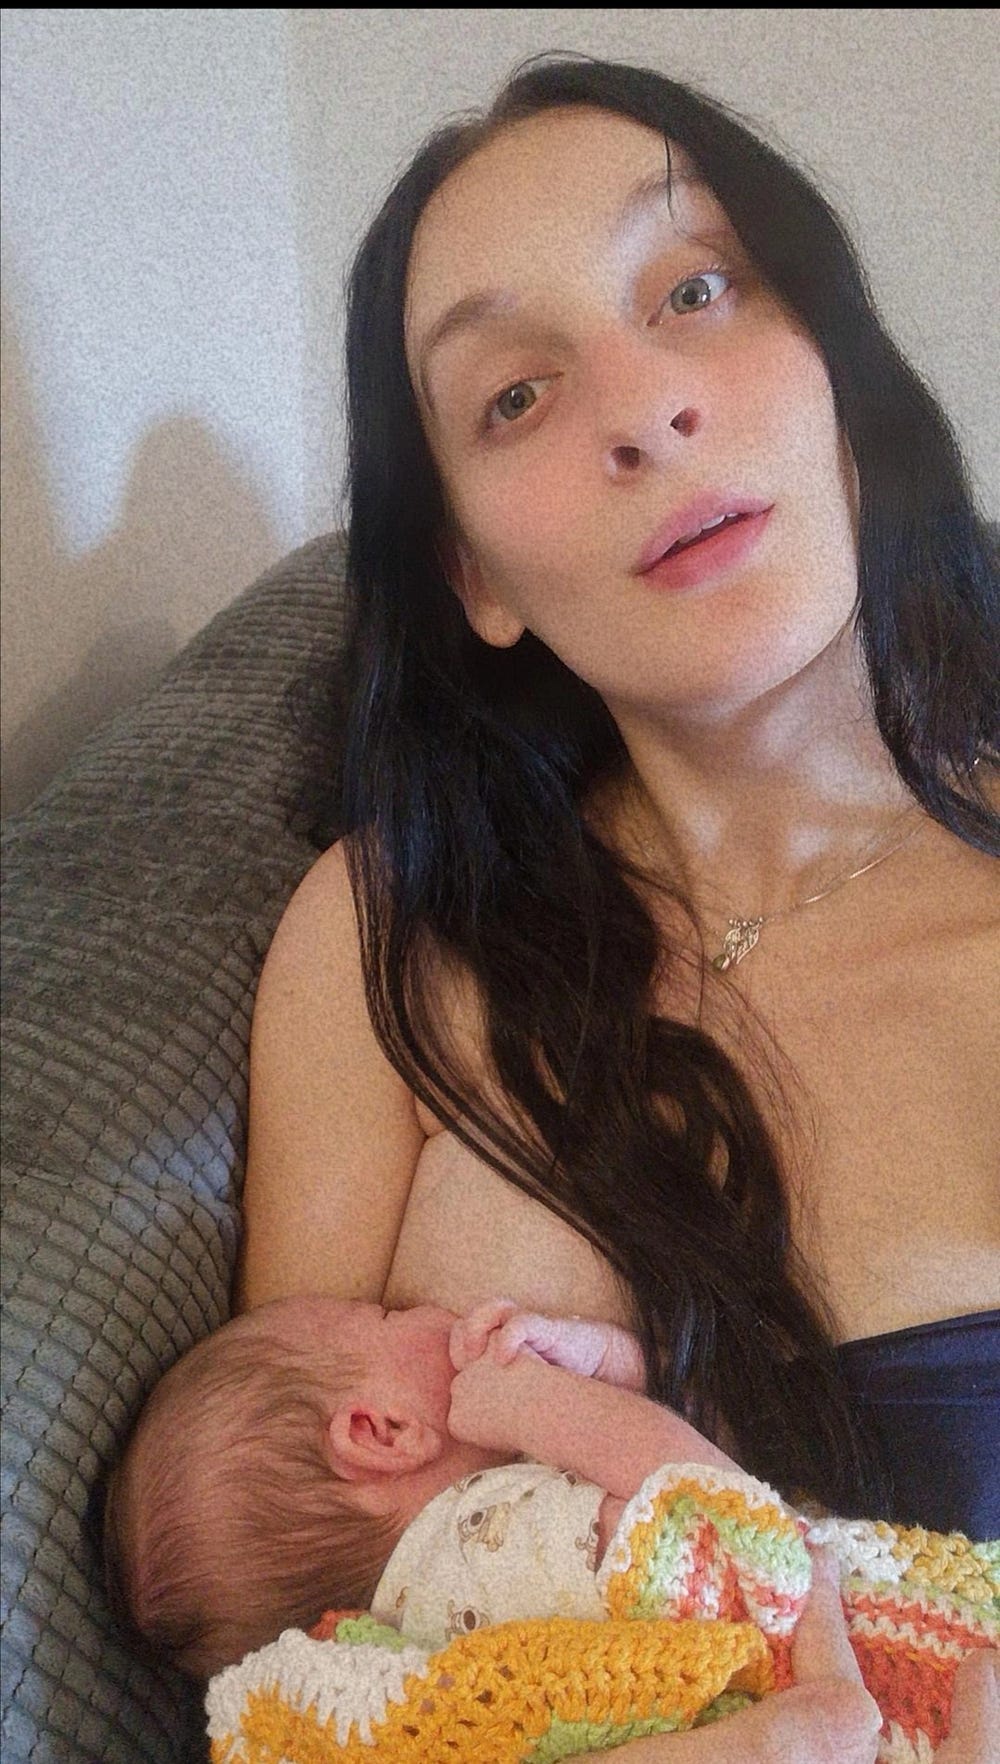 A young conscious mother breastfeeding her newborn baby